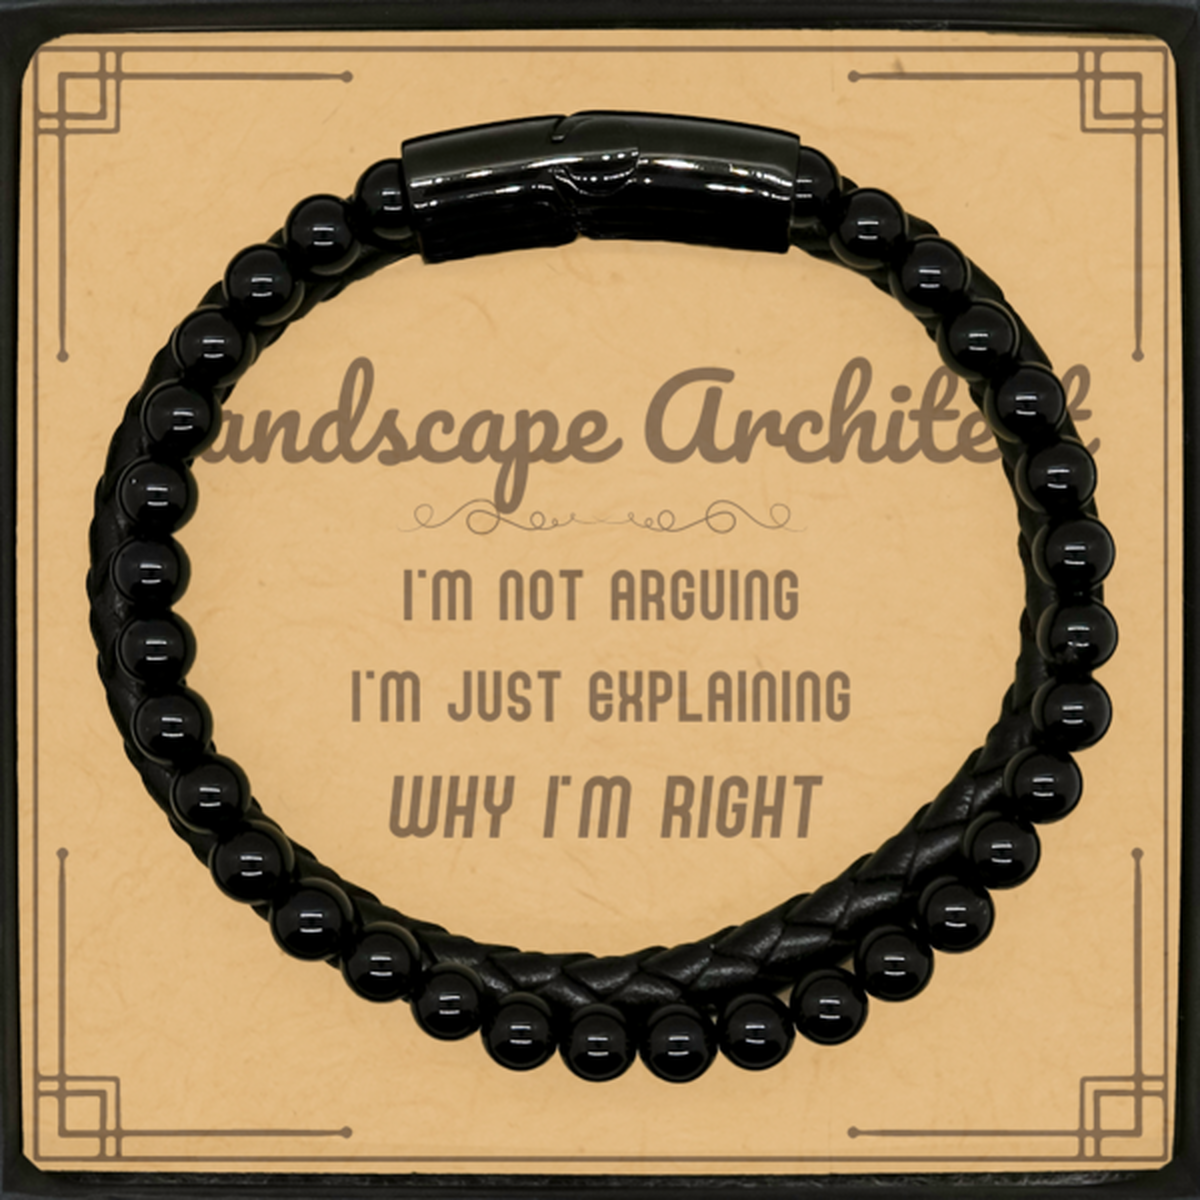 Landscape Architect I'm not Arguing. I'm Just Explaining Why I'm RIGHT Stone Leather Bracelets, Funny Saying Quote Landscape Architect Gifts For Landscape Architect Message Card Graduation Birthday Christmas Gifts for Men Women Coworker